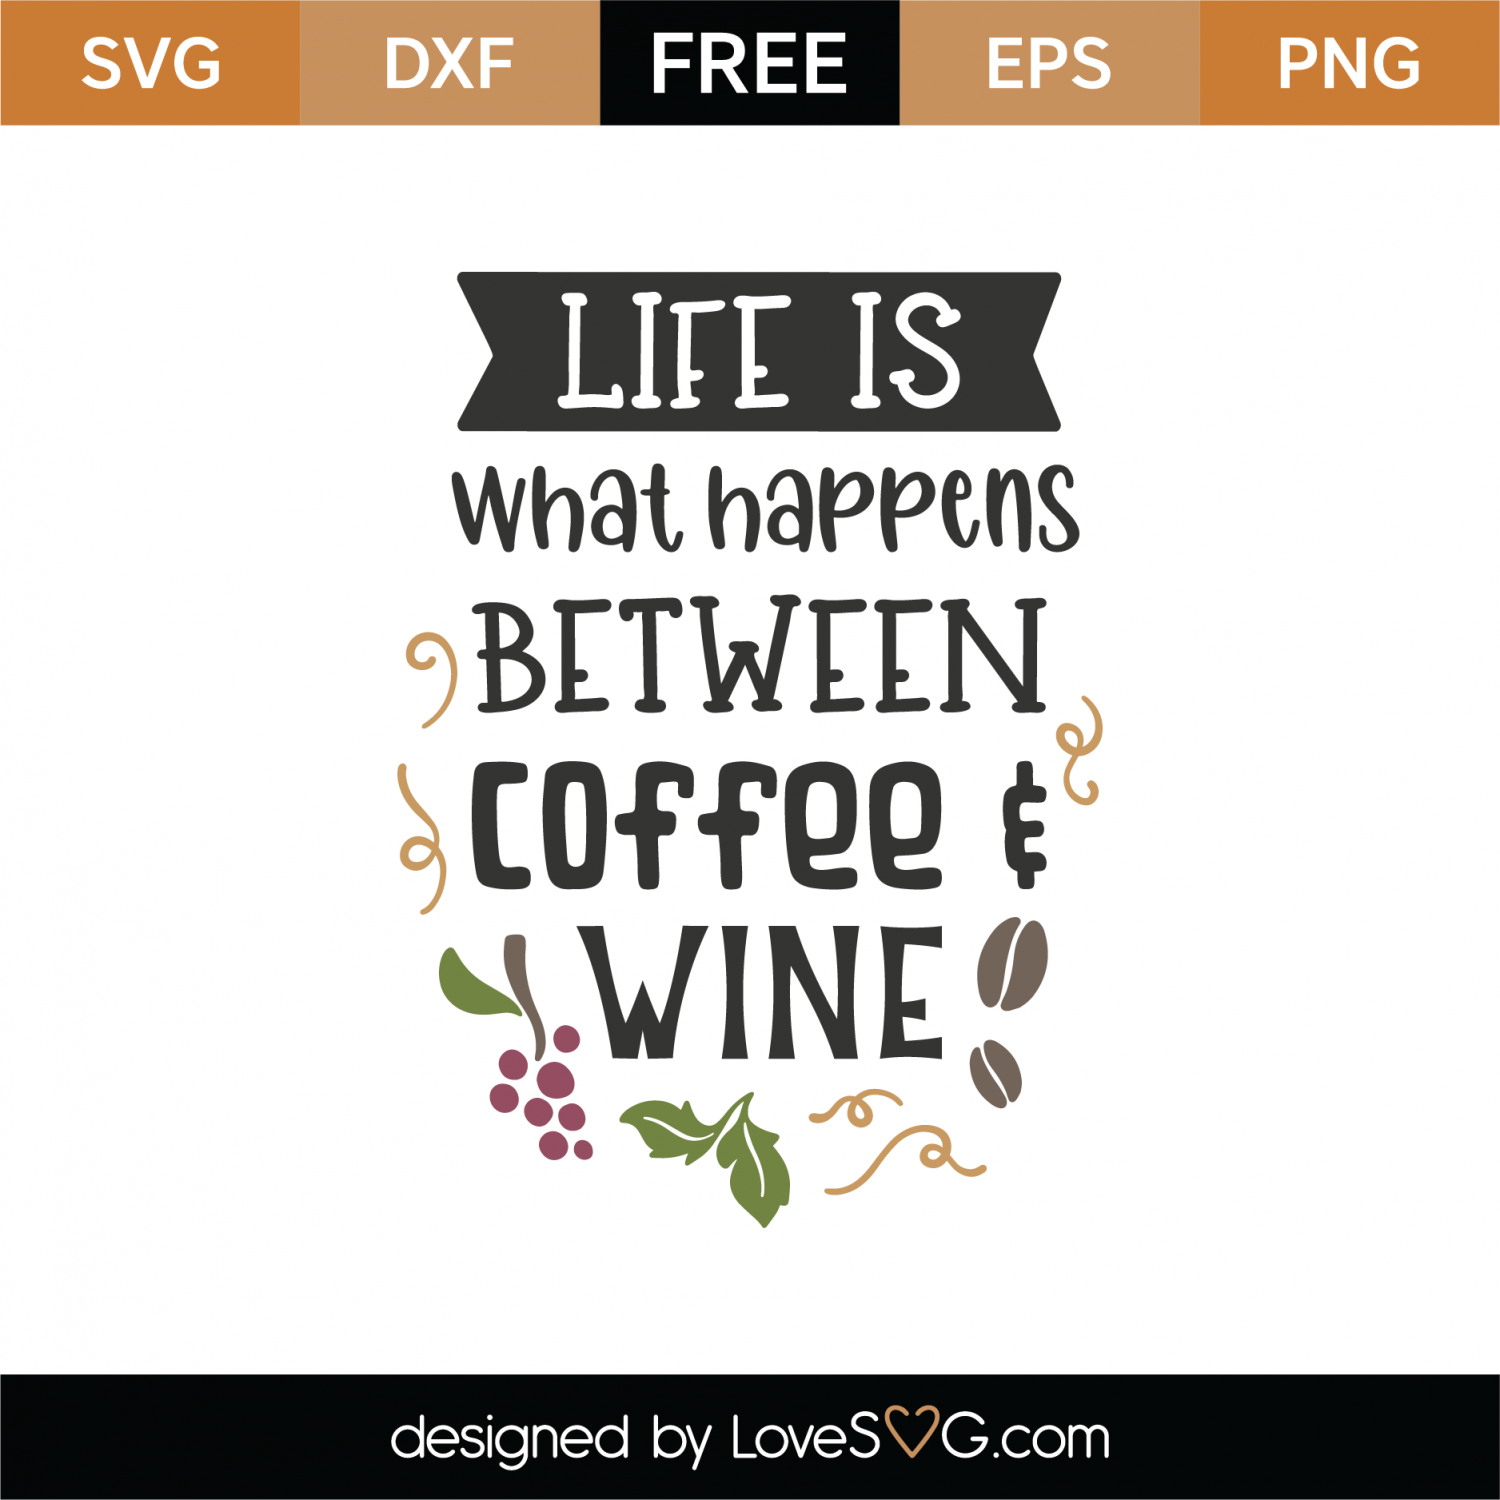 Download Free Life Is What Happens Between Coffee and Wine SVG Cut ...